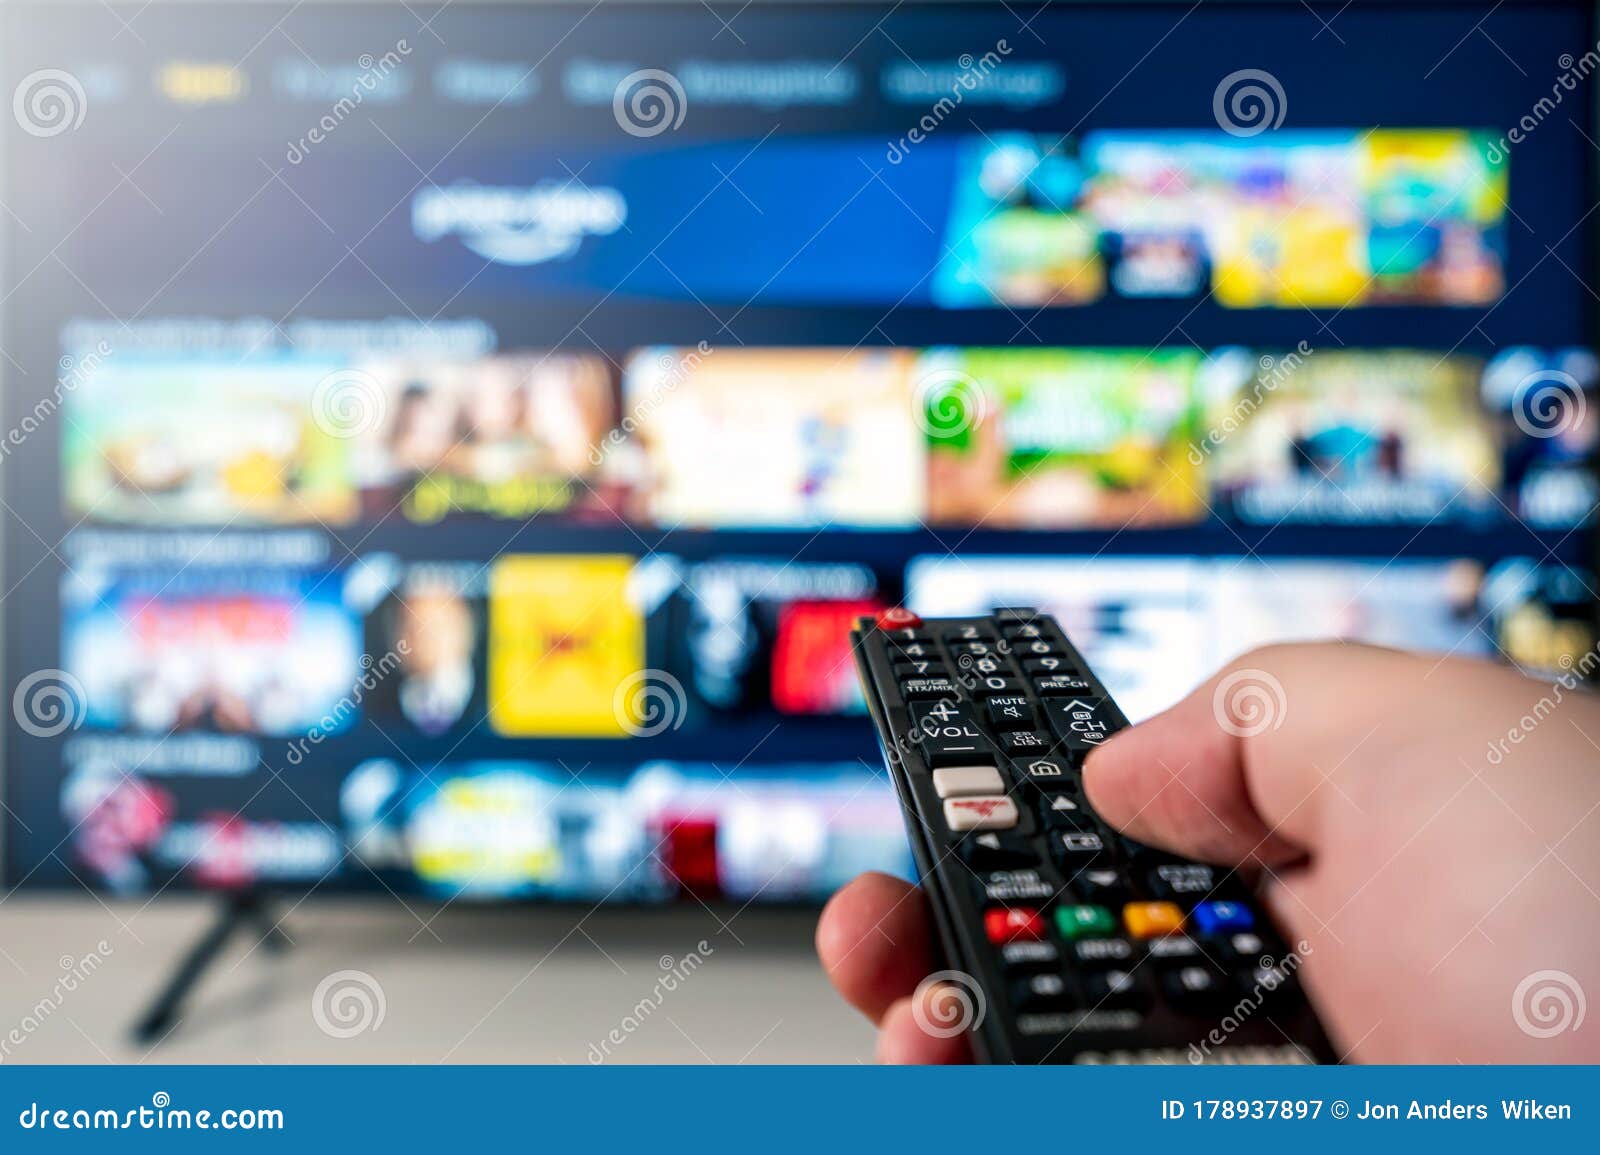 hand with tv remote aimed towards big 4k flat screen oled tv with blurred out tv entertainment system meny.